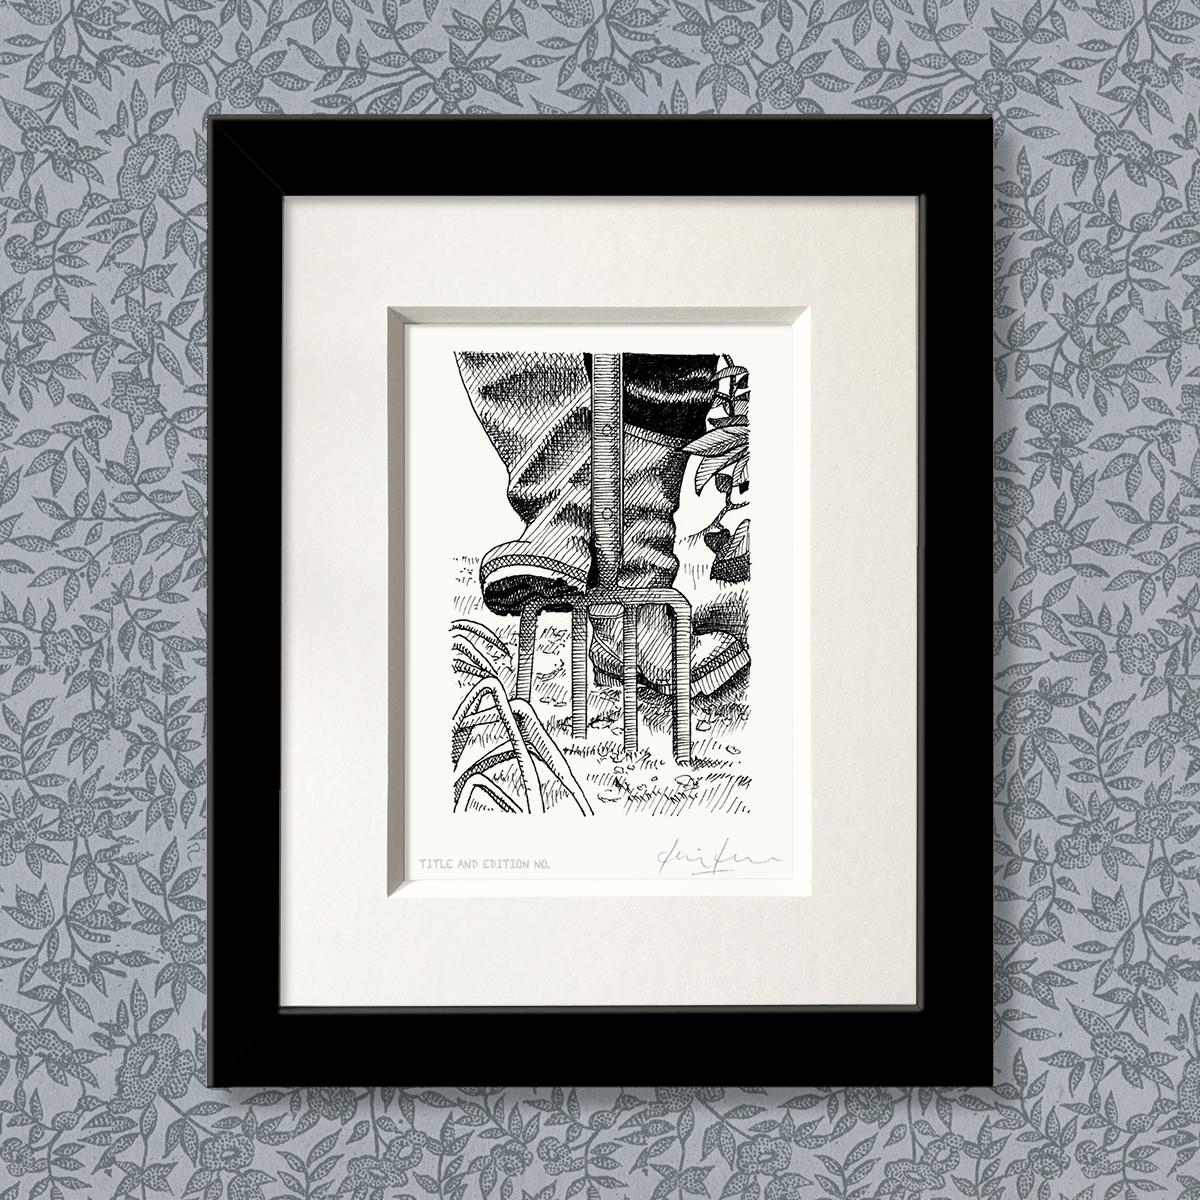 Limited edition print from pen and ink drawing of someone digging in a black frame